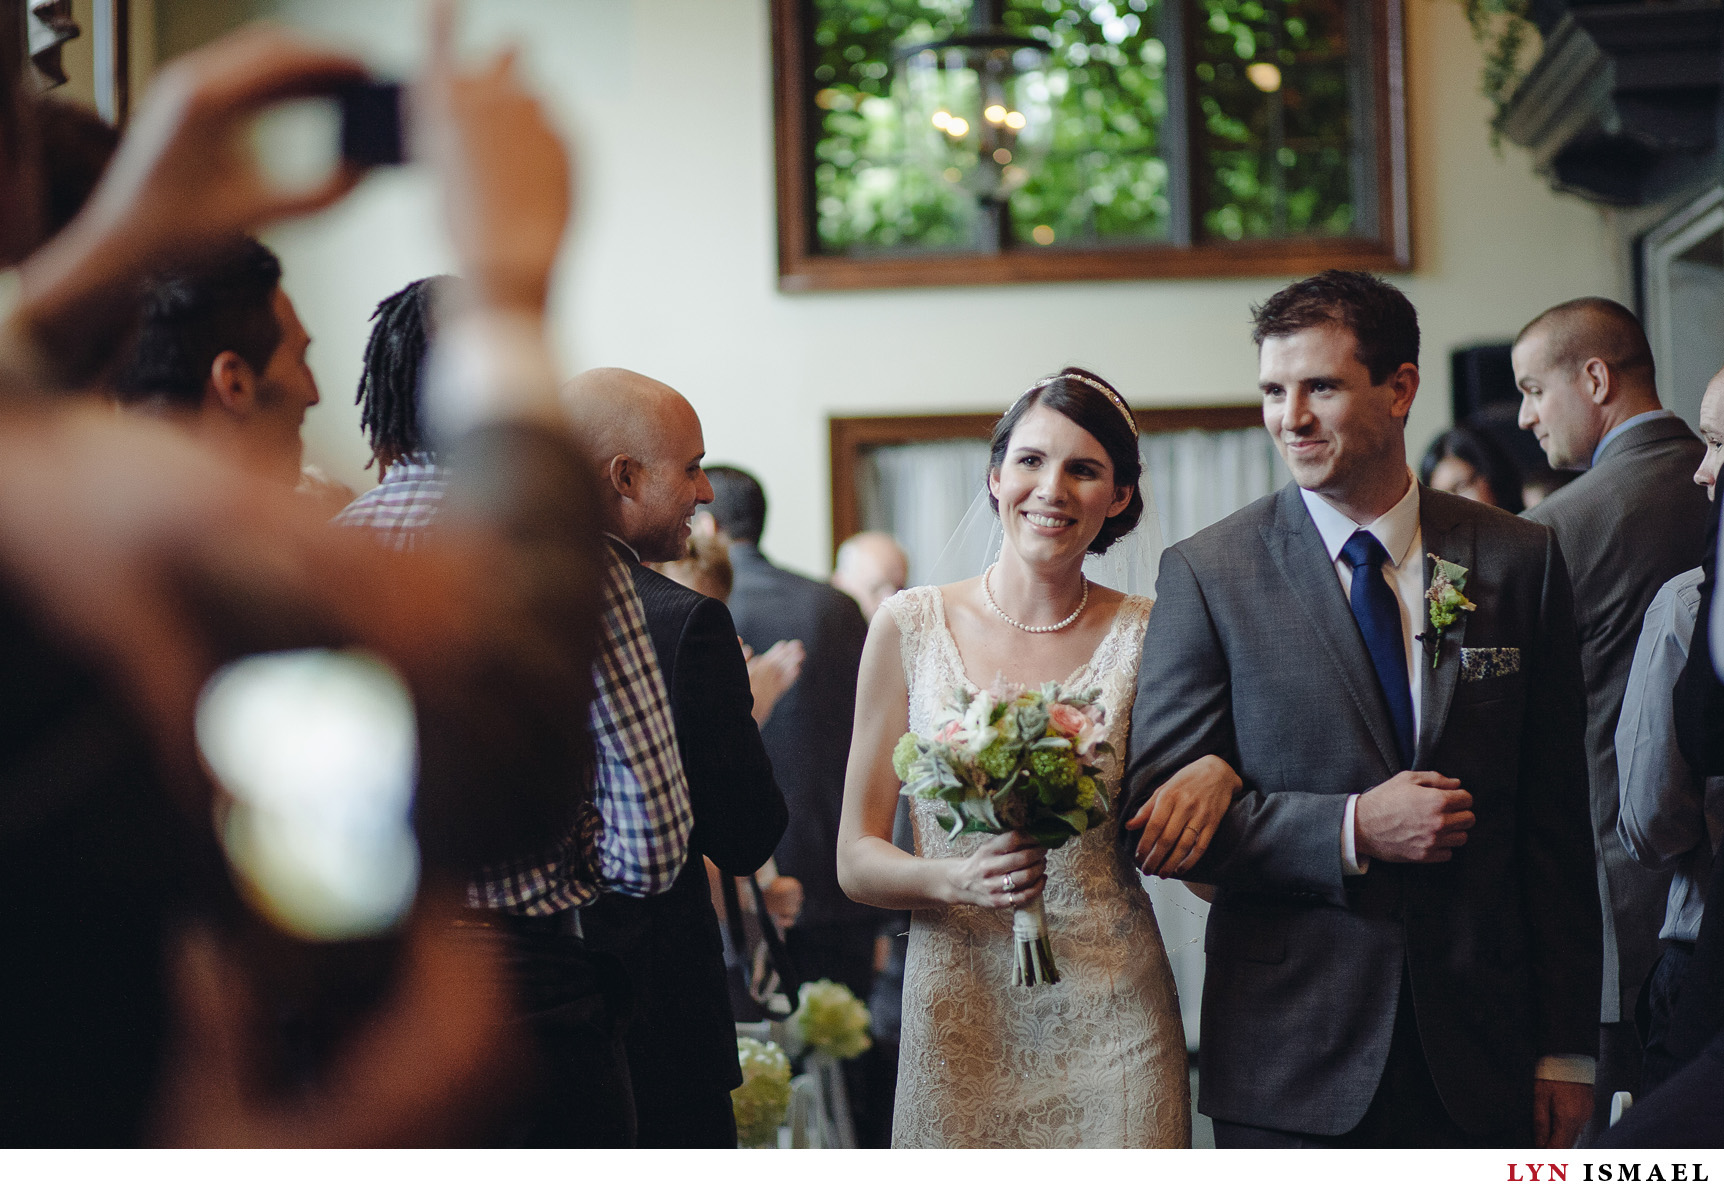 A Windermere Manor recessional